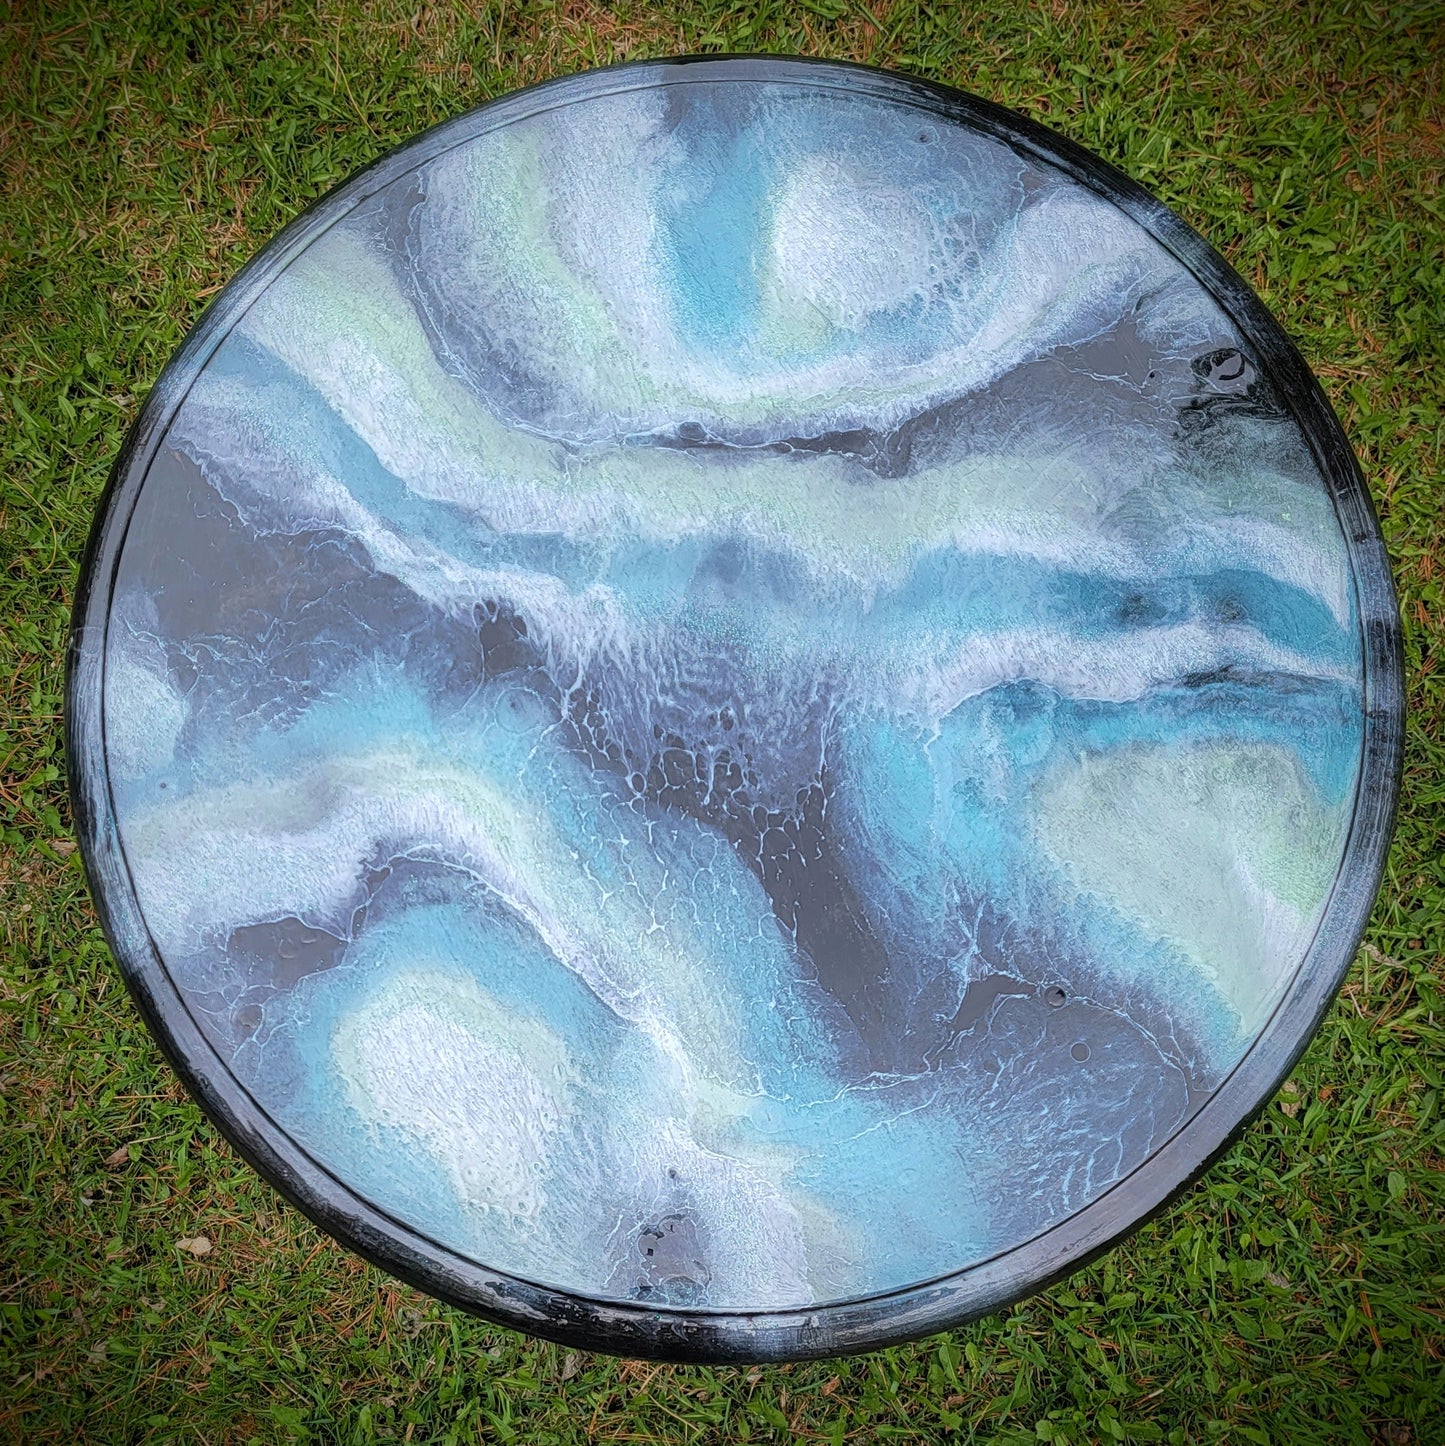 Refinished Resin Geode Wooden Table